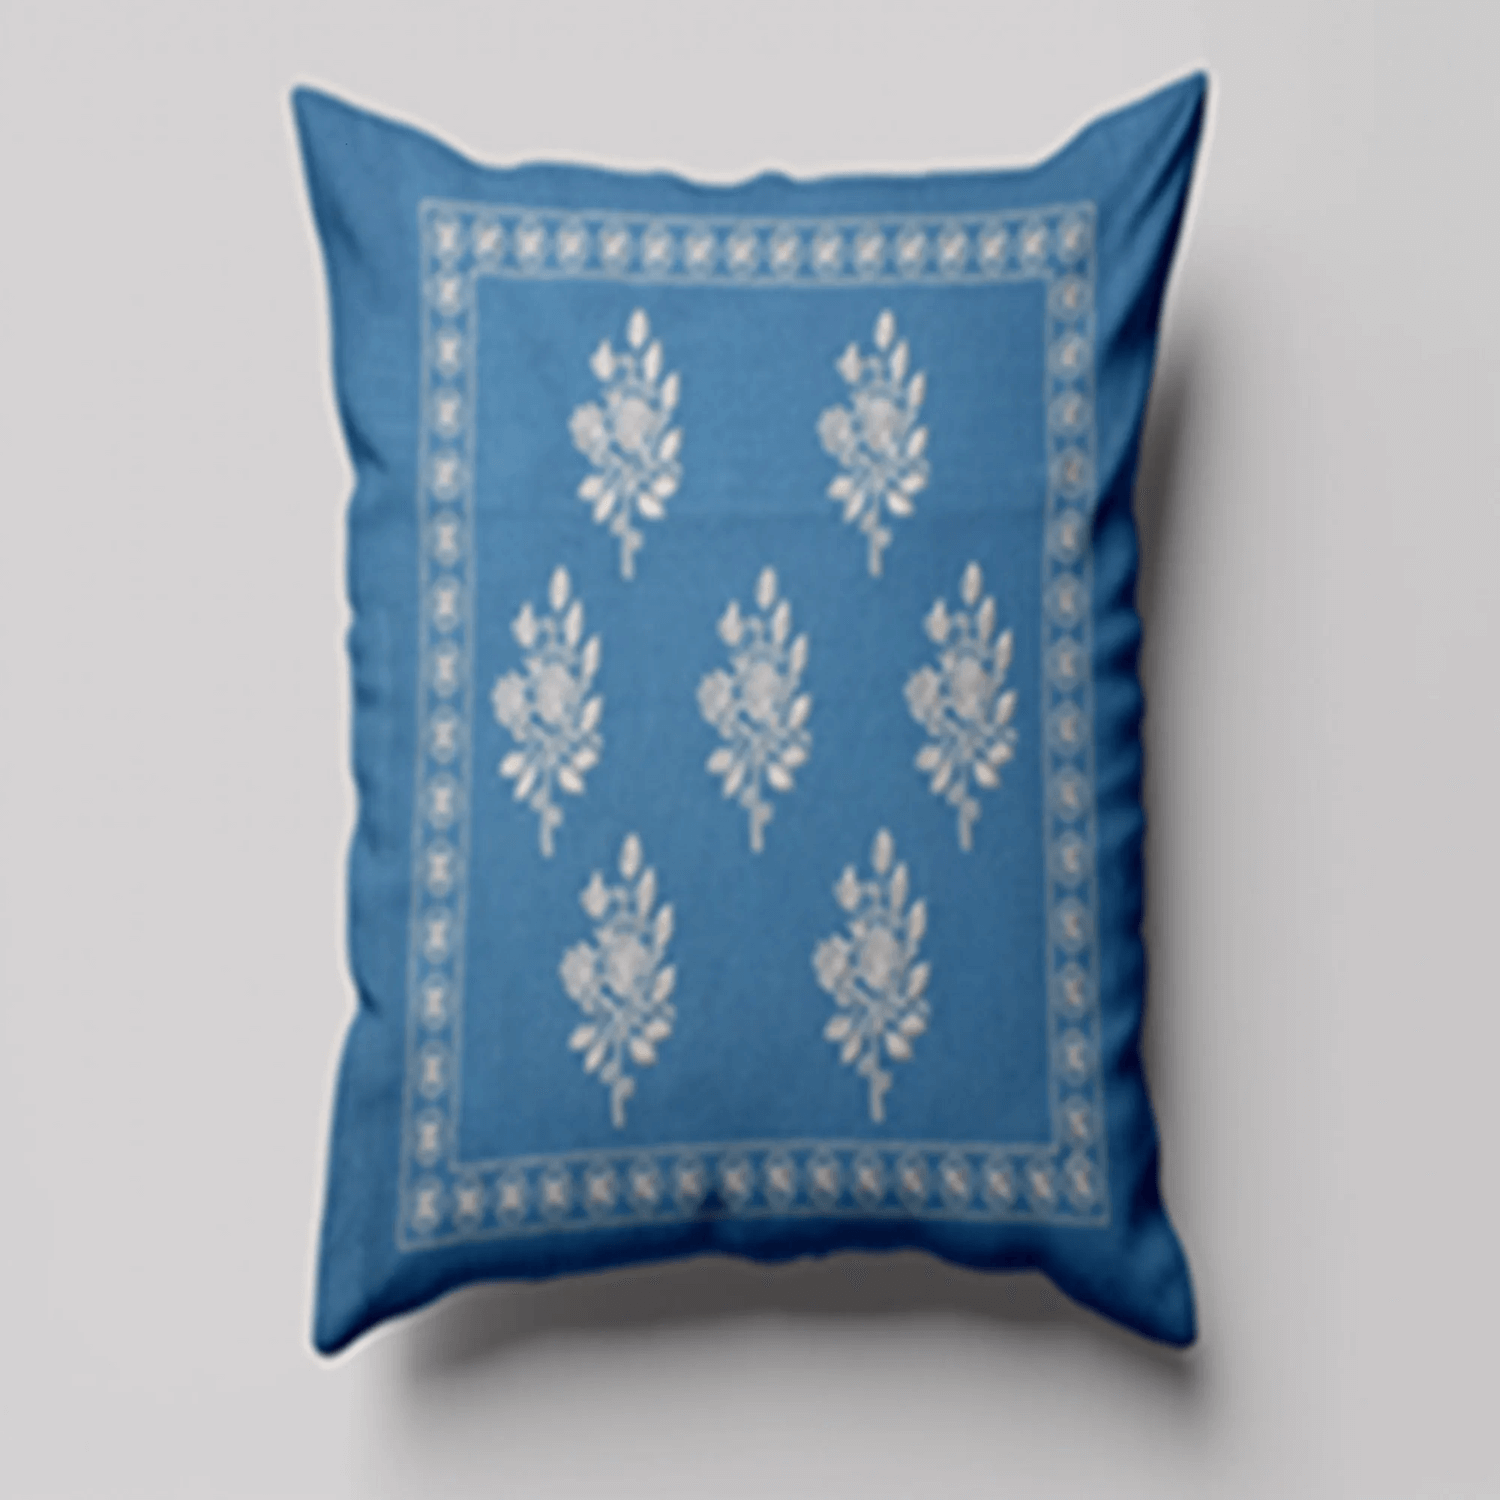 Printed & Embroidered Decorative throw Cushion Cover16*16 inches For Living Room Sofa (Embroidery leaf) cotton